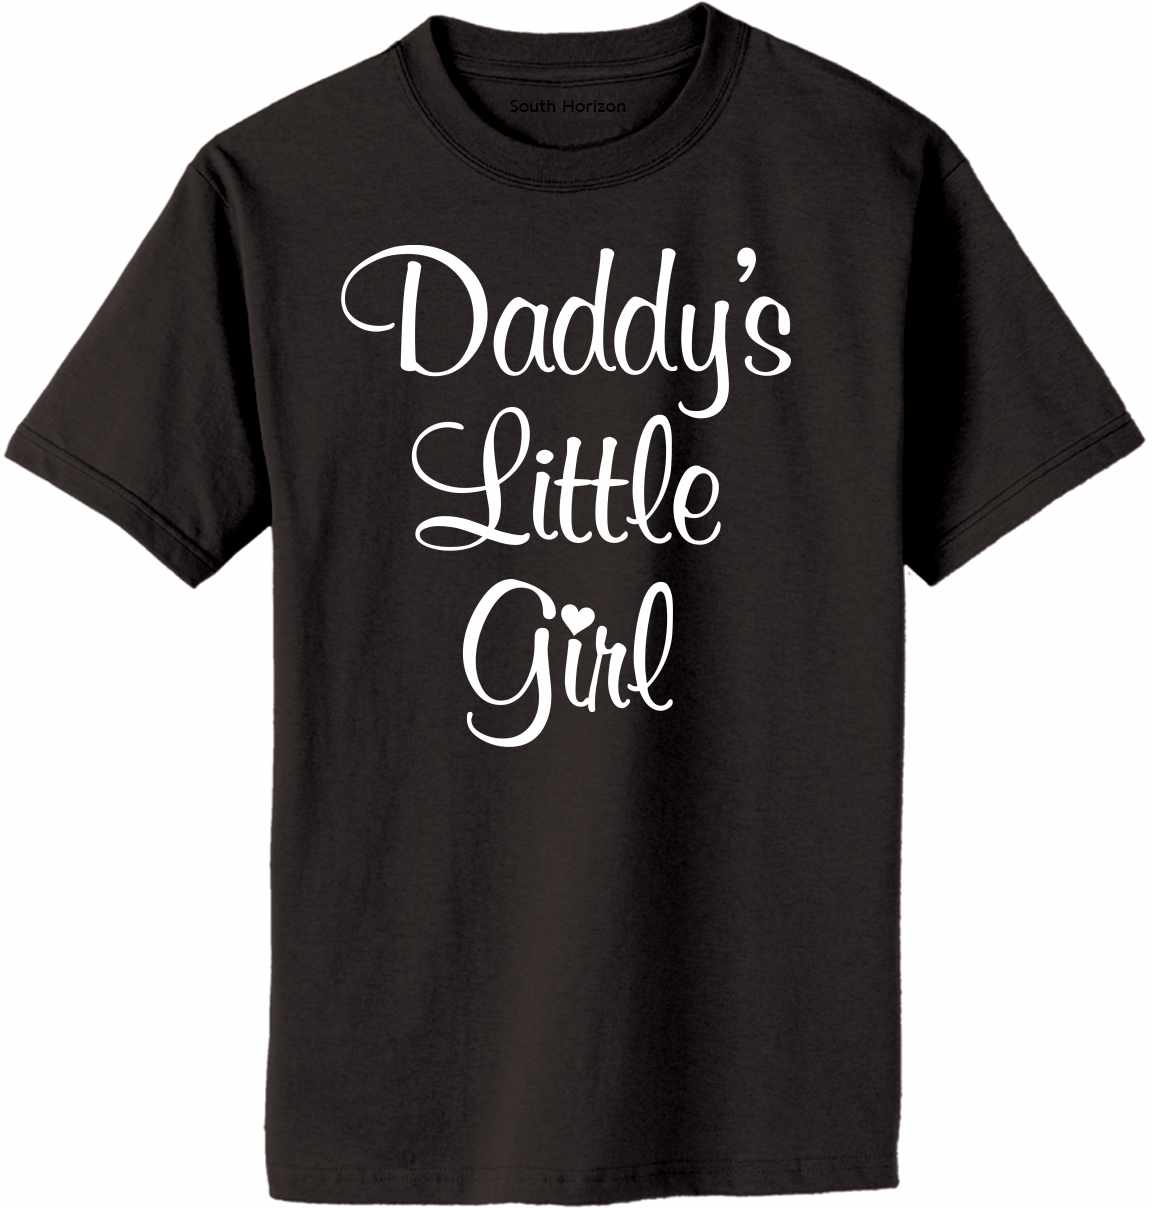 Daddy's Little Girl on Adult T-Shirt (#1294-1)